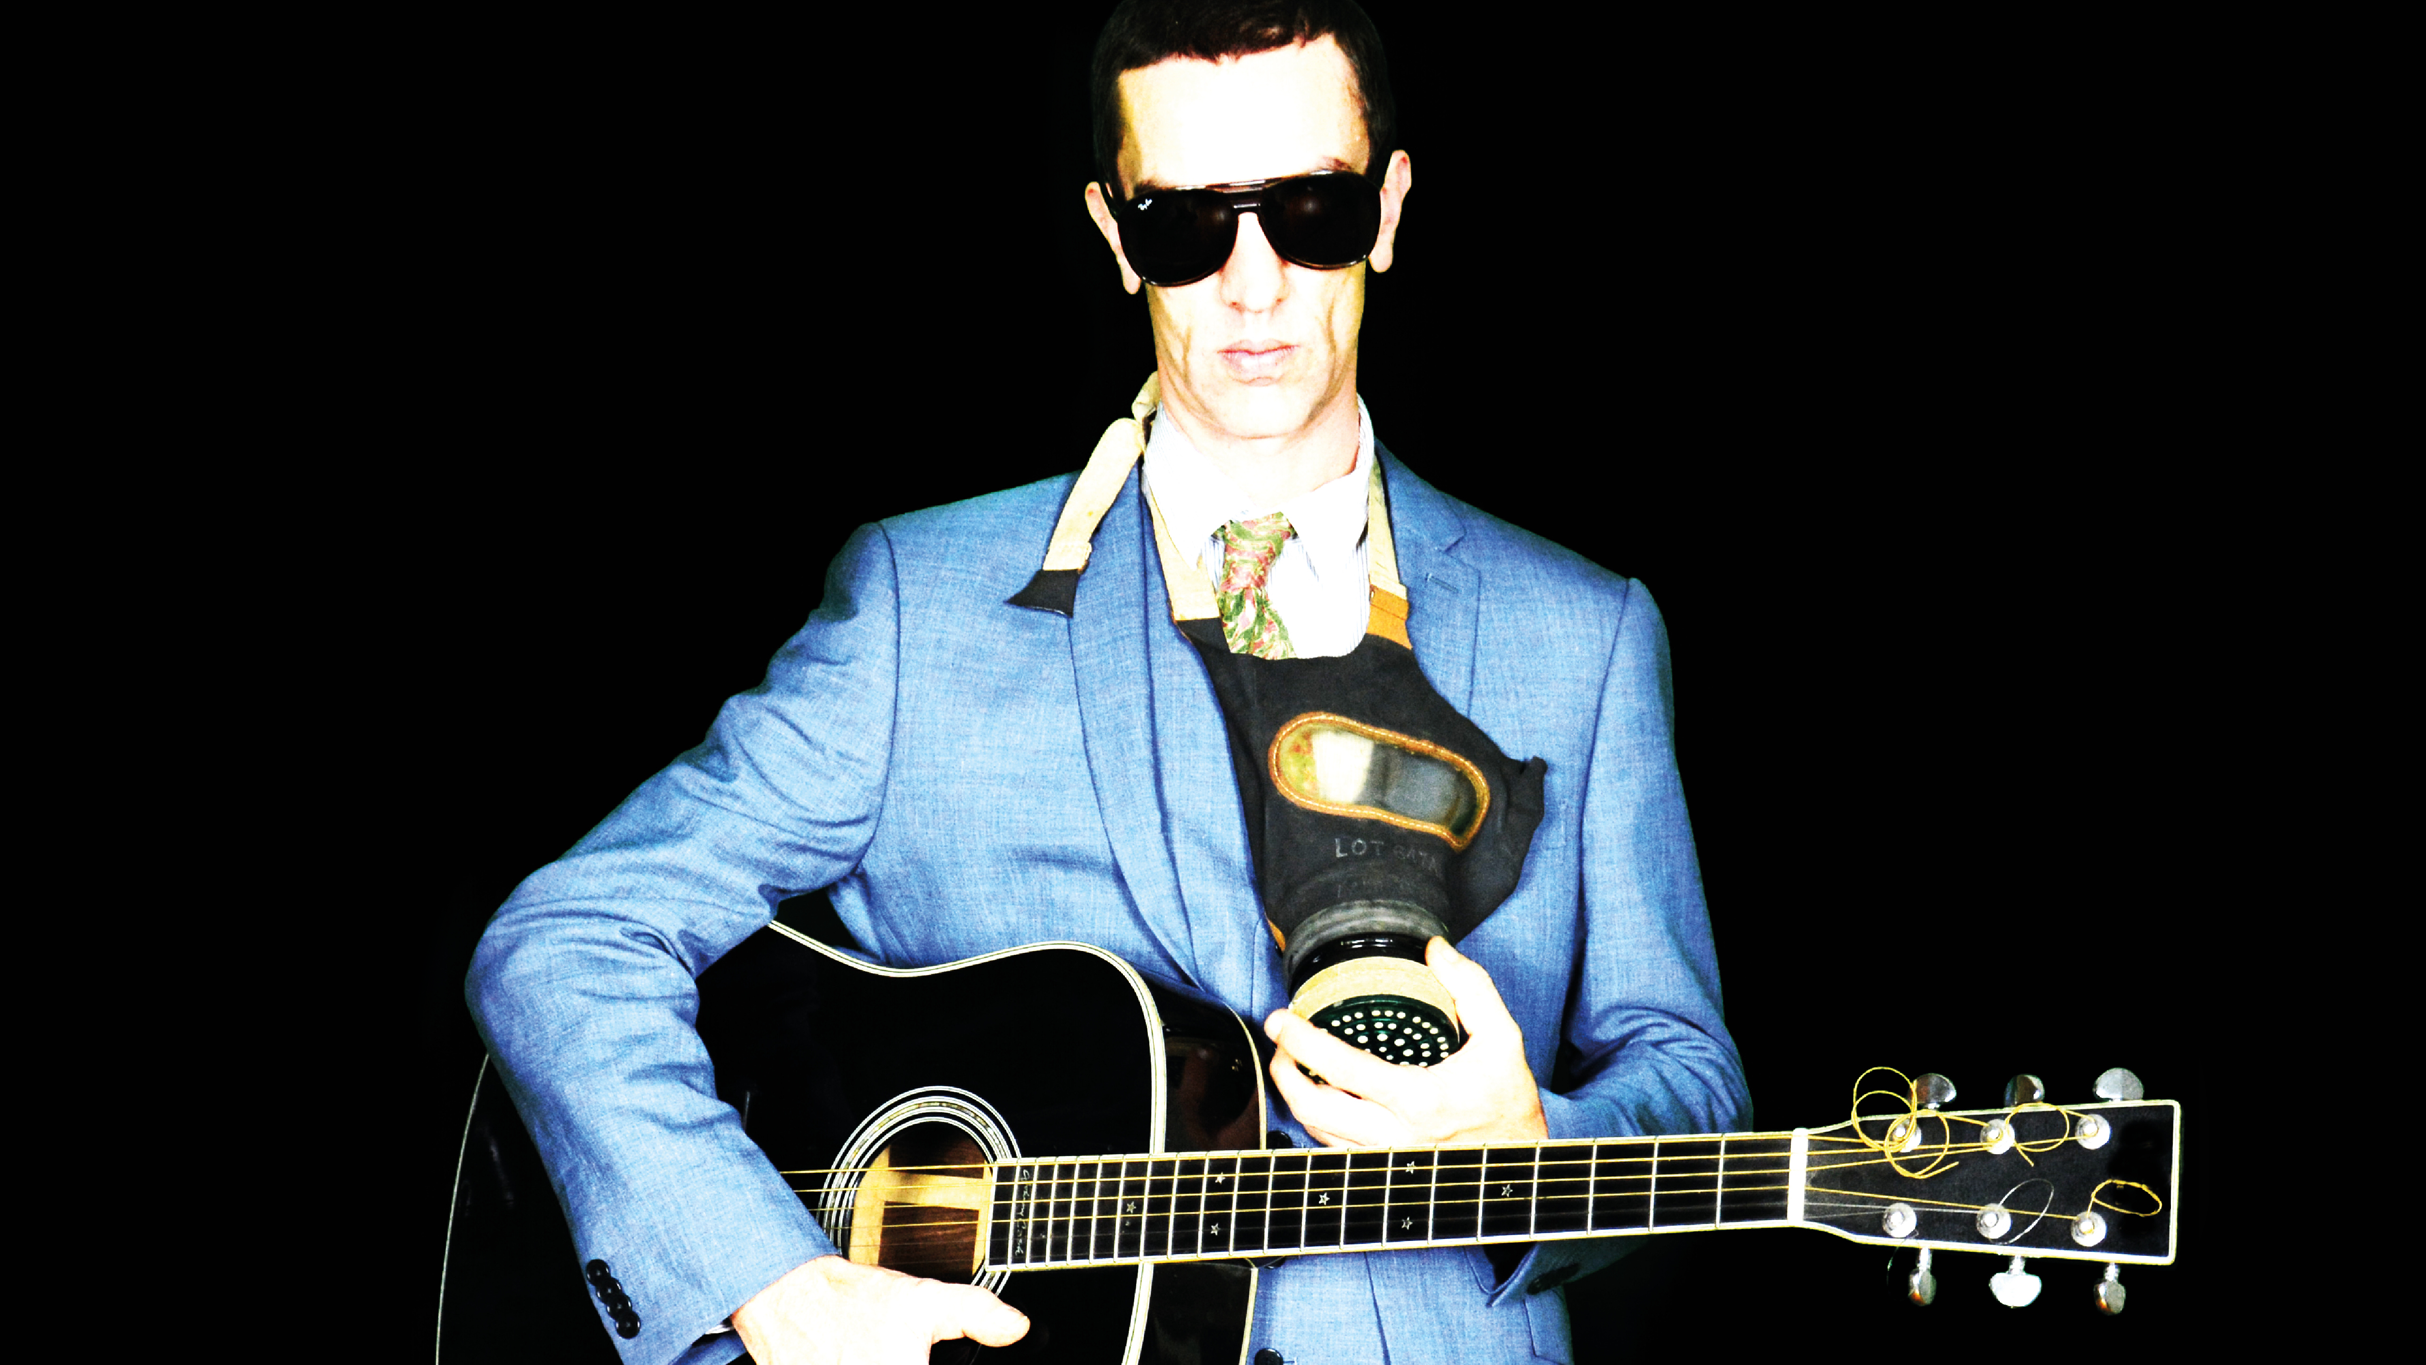 Richard Ashcroft  - Dalby Forest in Yorkshire promo photo for Cuffe & Taylor presale offer code